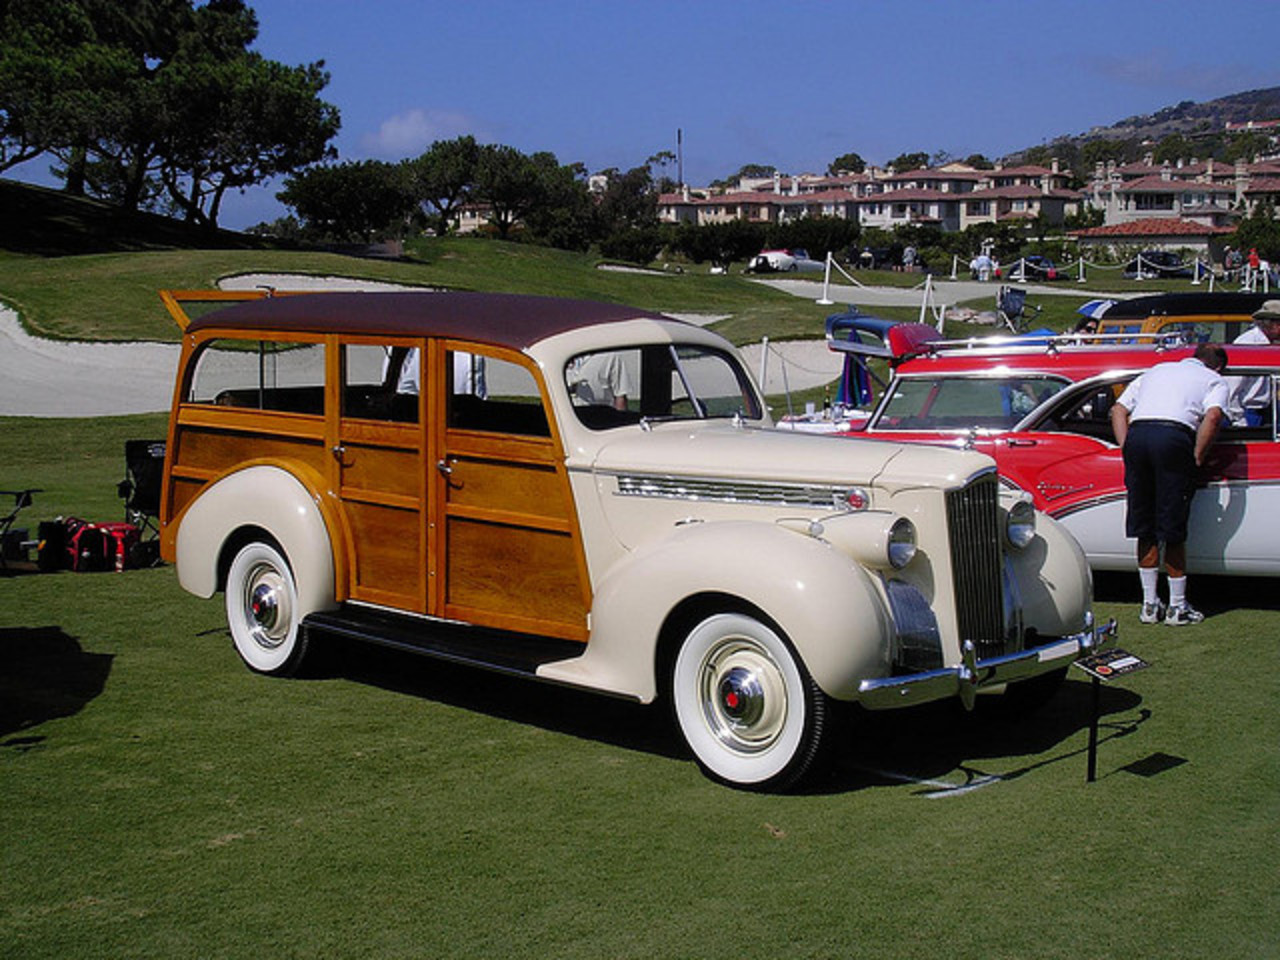 1940 Packard Model 110 Woodie Station Wagon | Flickr - Photo Sharing!